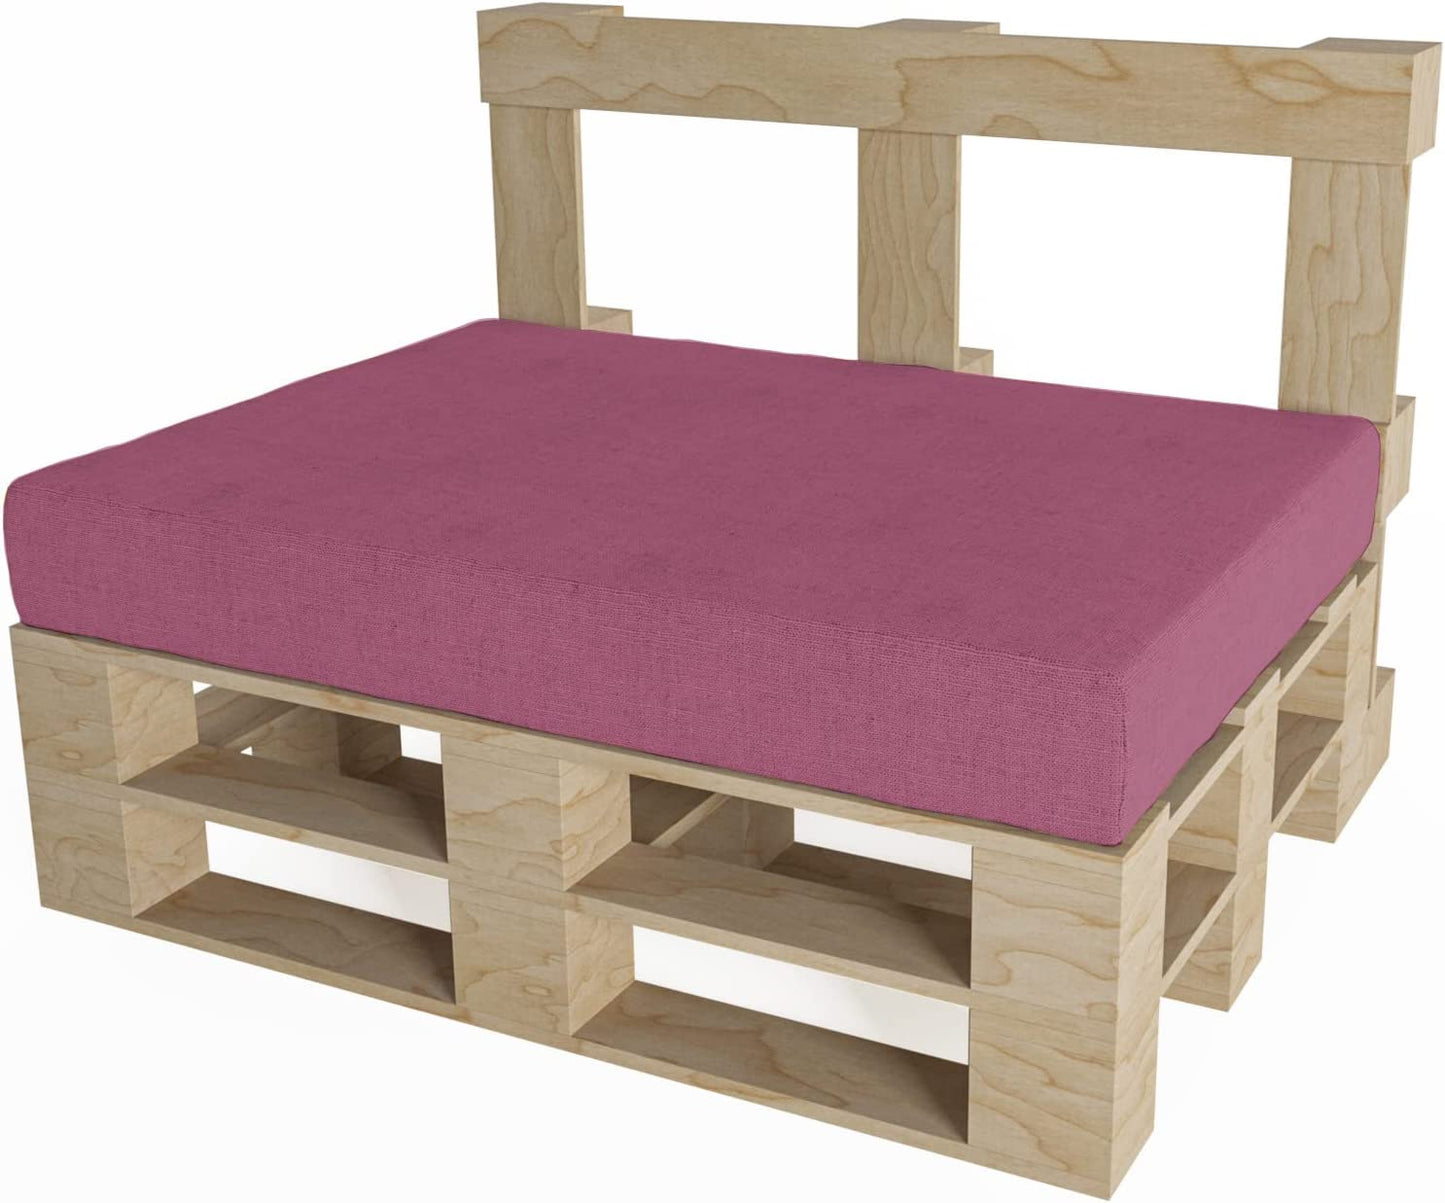 Pallet cushion washable garden cushion for EU pallets pallet cushion cover removable with zipper many colors and sizes